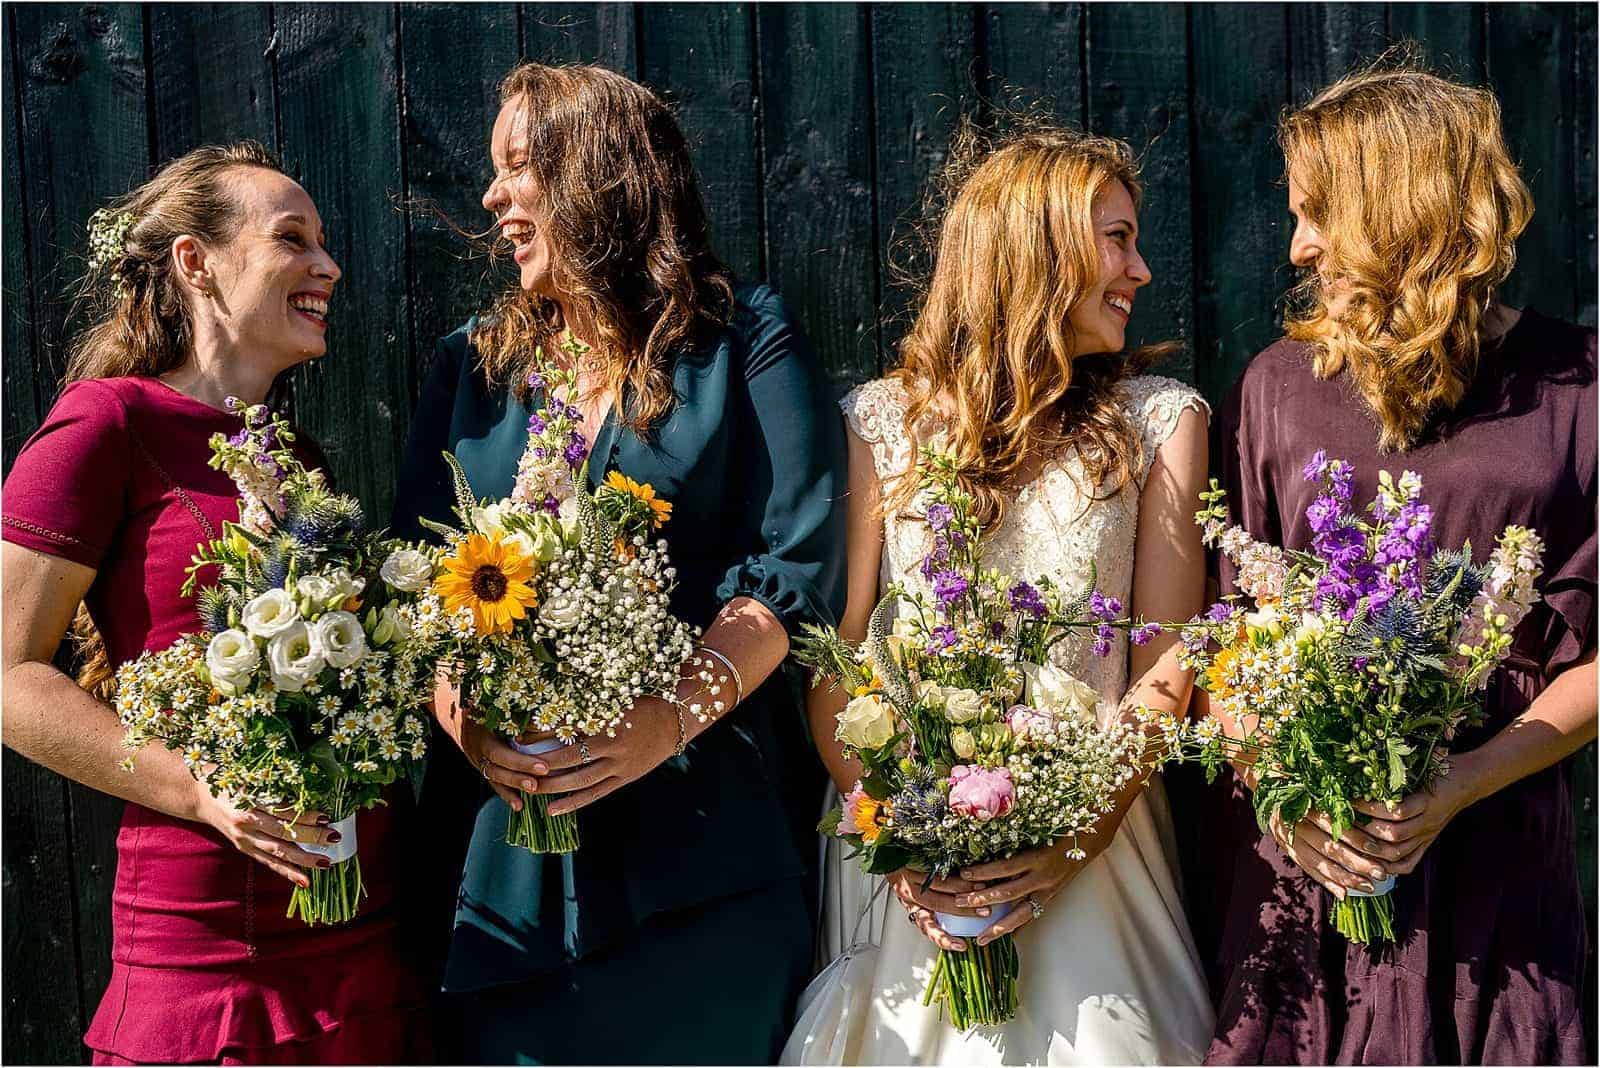 where to start with wedding planning - newly engaged - image of bride with bridesmaids laughing